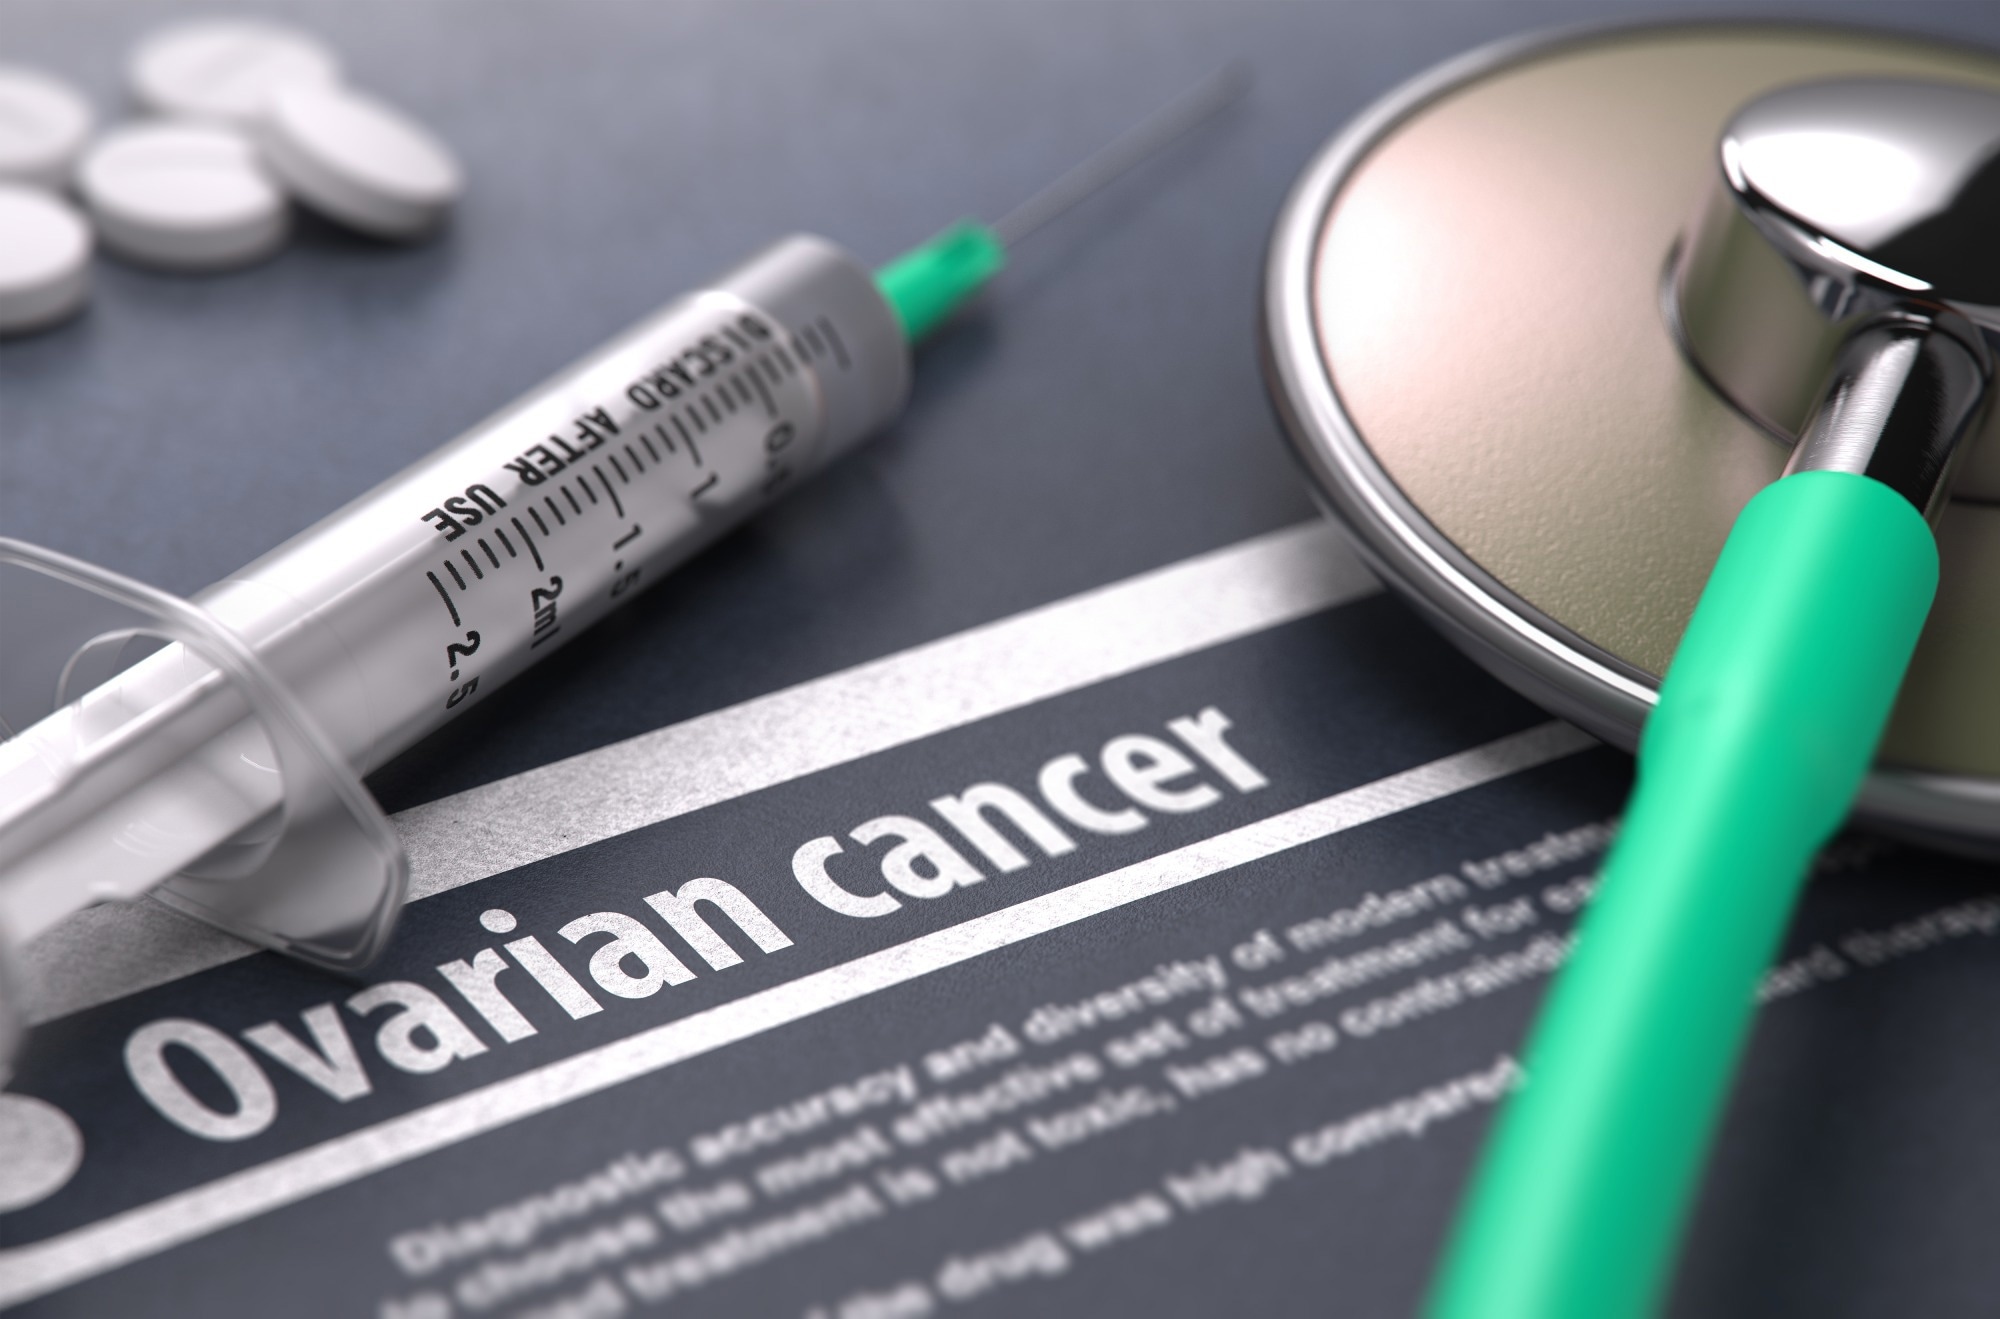 Study: AhRR and PPP1R3C: Potential Prognostic Biomarkers for Serous Ovarian Cancer. Image Credit: ESBProfessional/Shutterstock.com